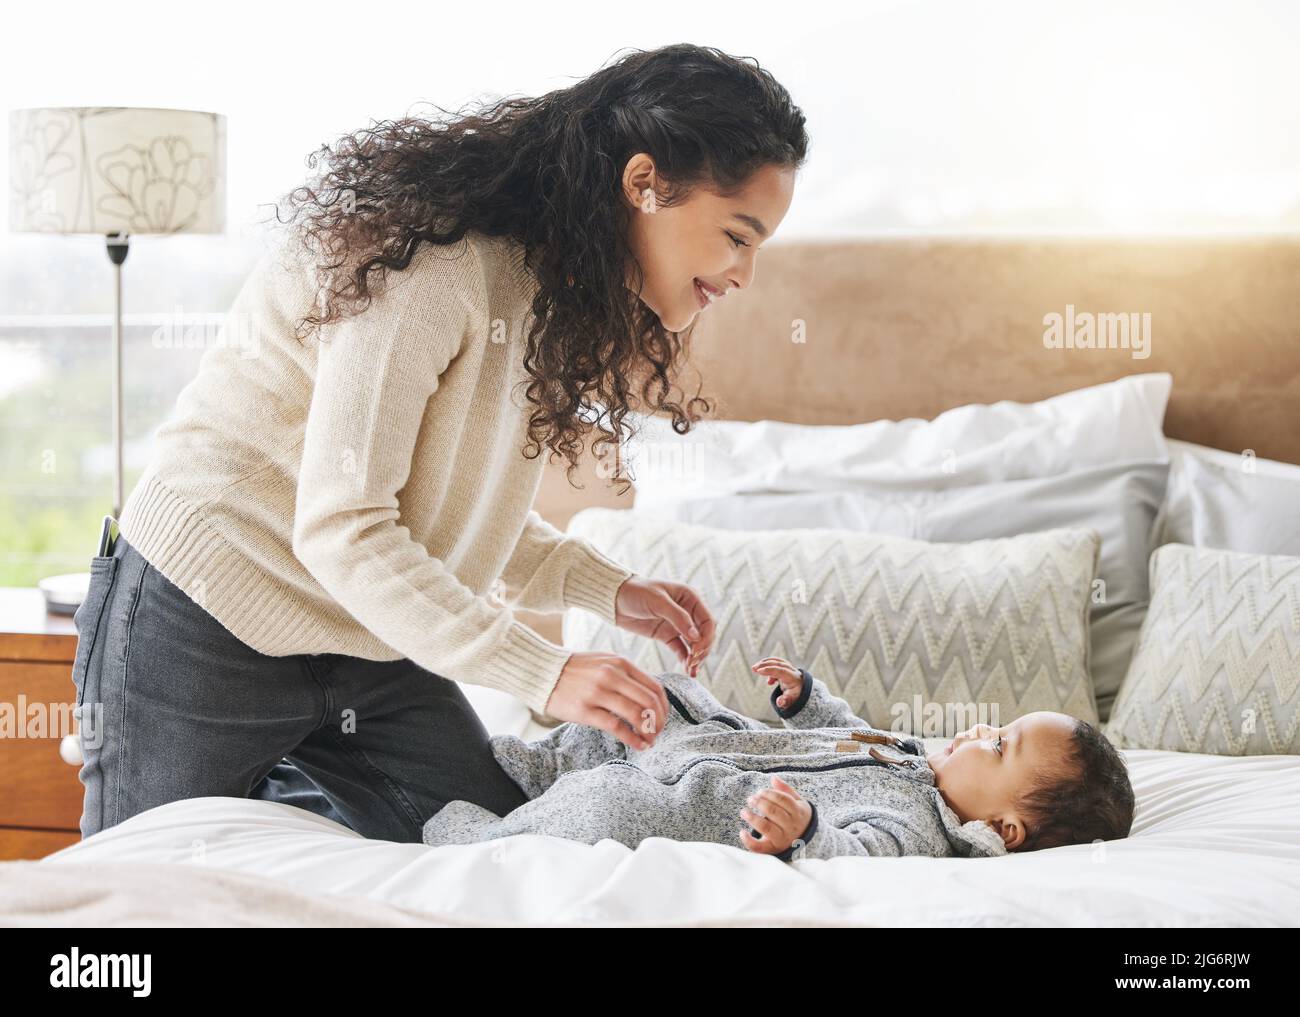 Lets get you into a fresh diaper. Shot of an adorable baby boy and his mother bonding during his diaper change at home. Stock Photo